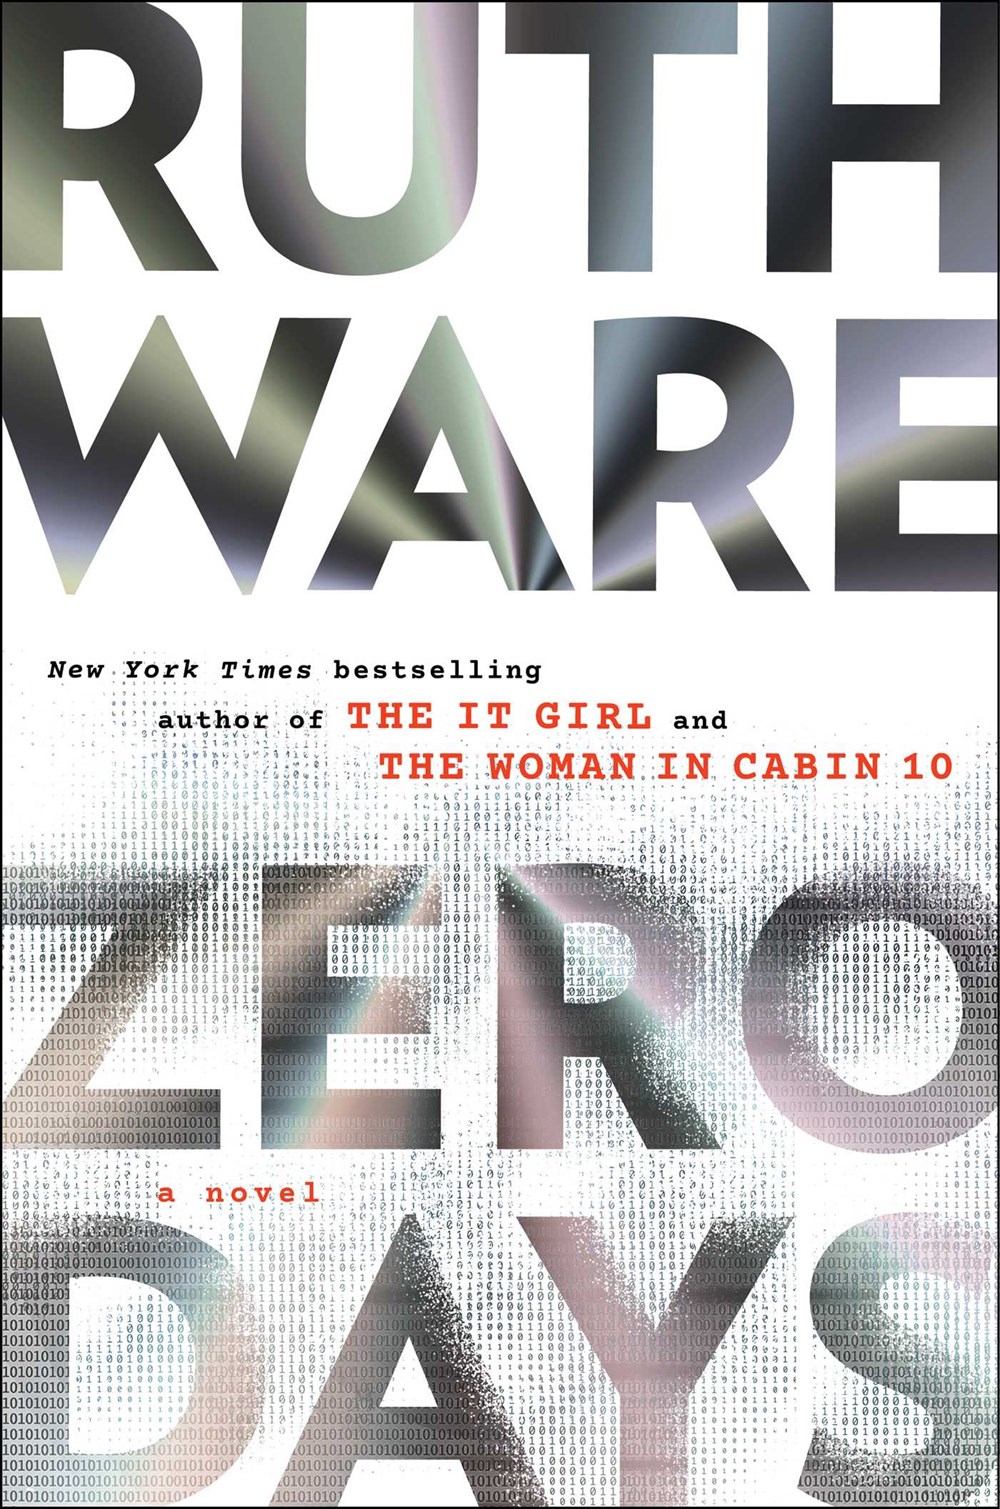 Read-Alikes for ‘Zero Days’ by Ruth Ware | LibraryReads